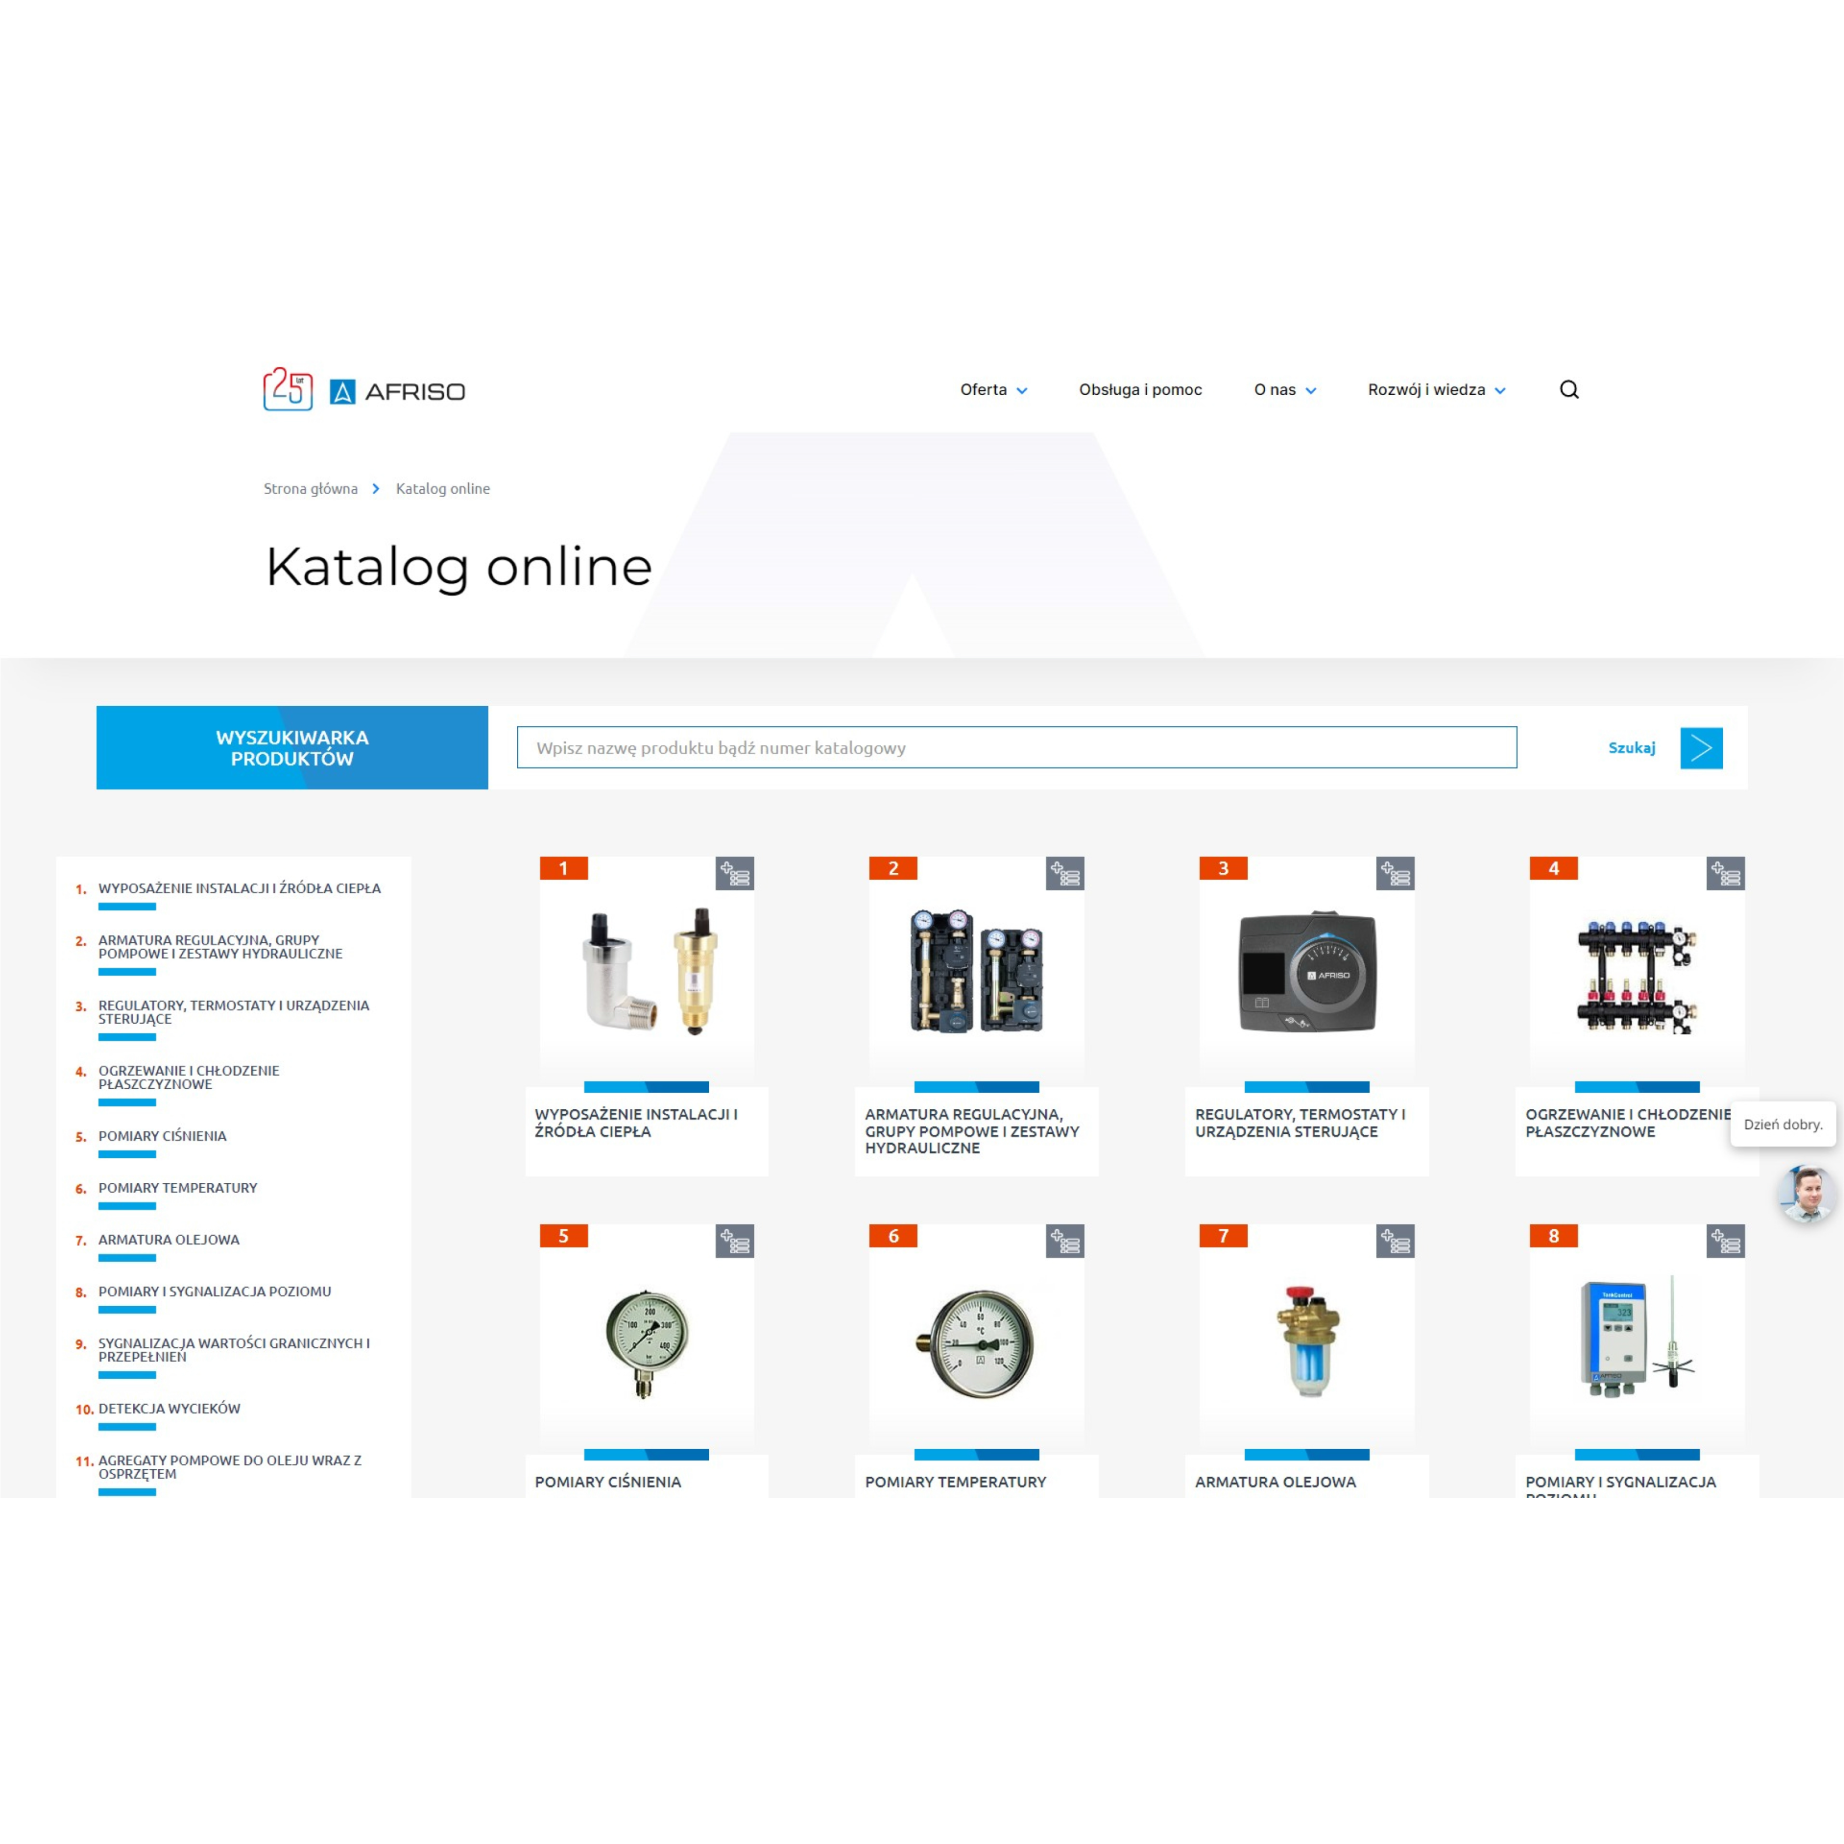 Online catalog page of AFRISO showcasing various precision instruments for heating and plumbing, including search functionality for specific products.